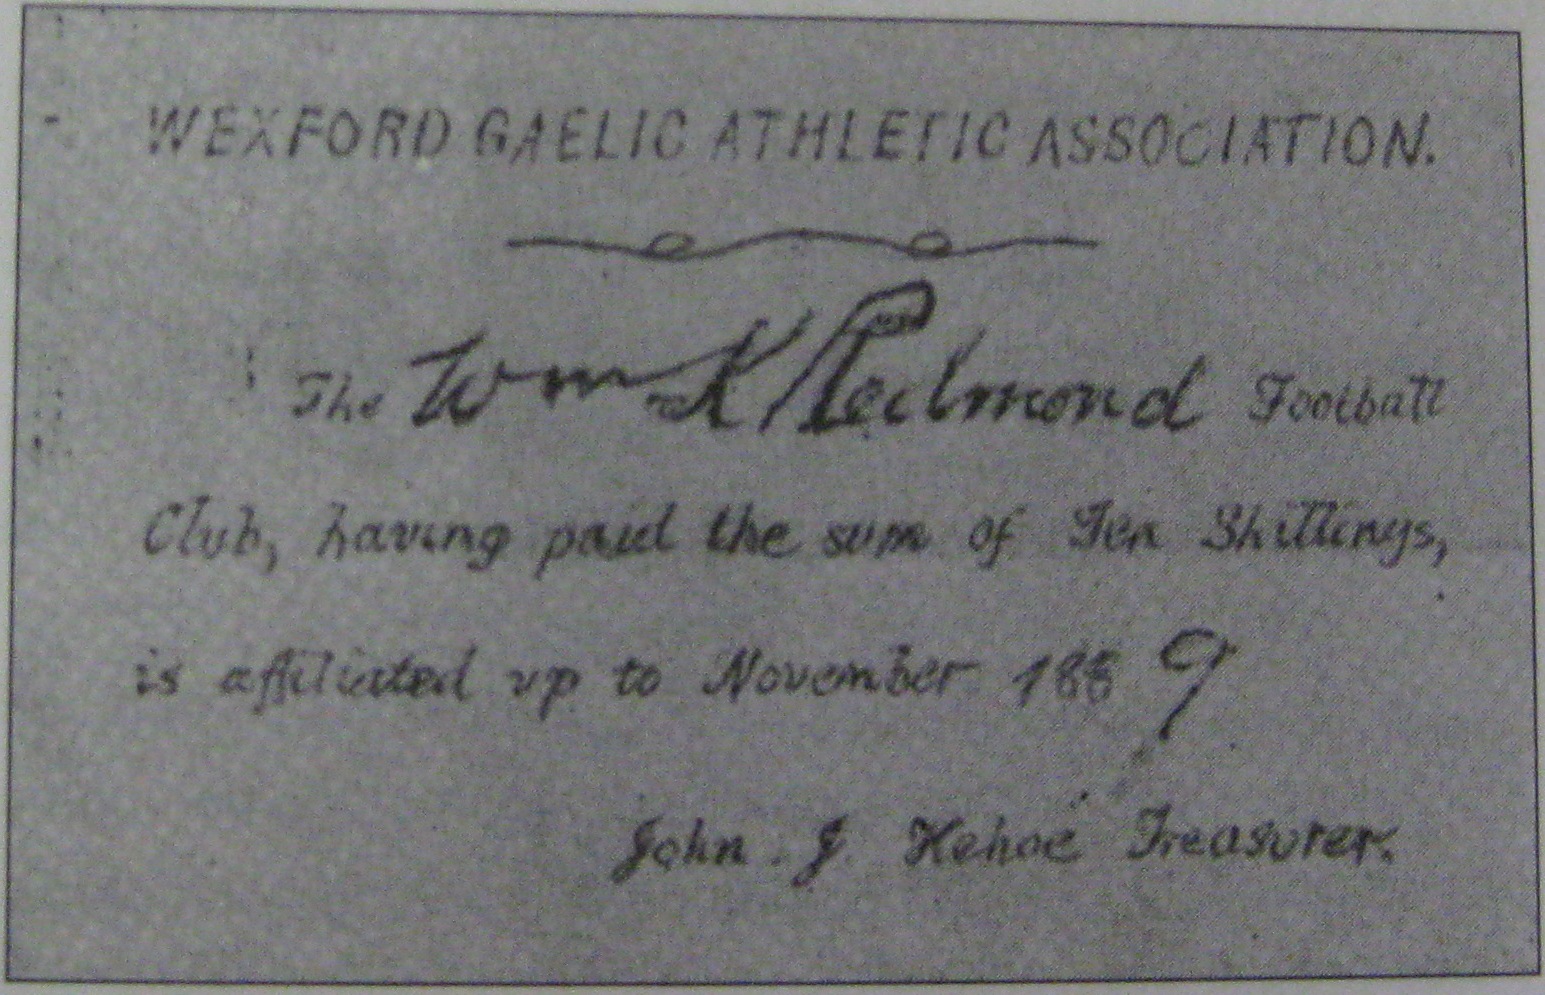 An affiliation receipt from the William K. Redmond Football Club shows that the cost of affiliation in 1889 was the substantial sum of ten shillings.